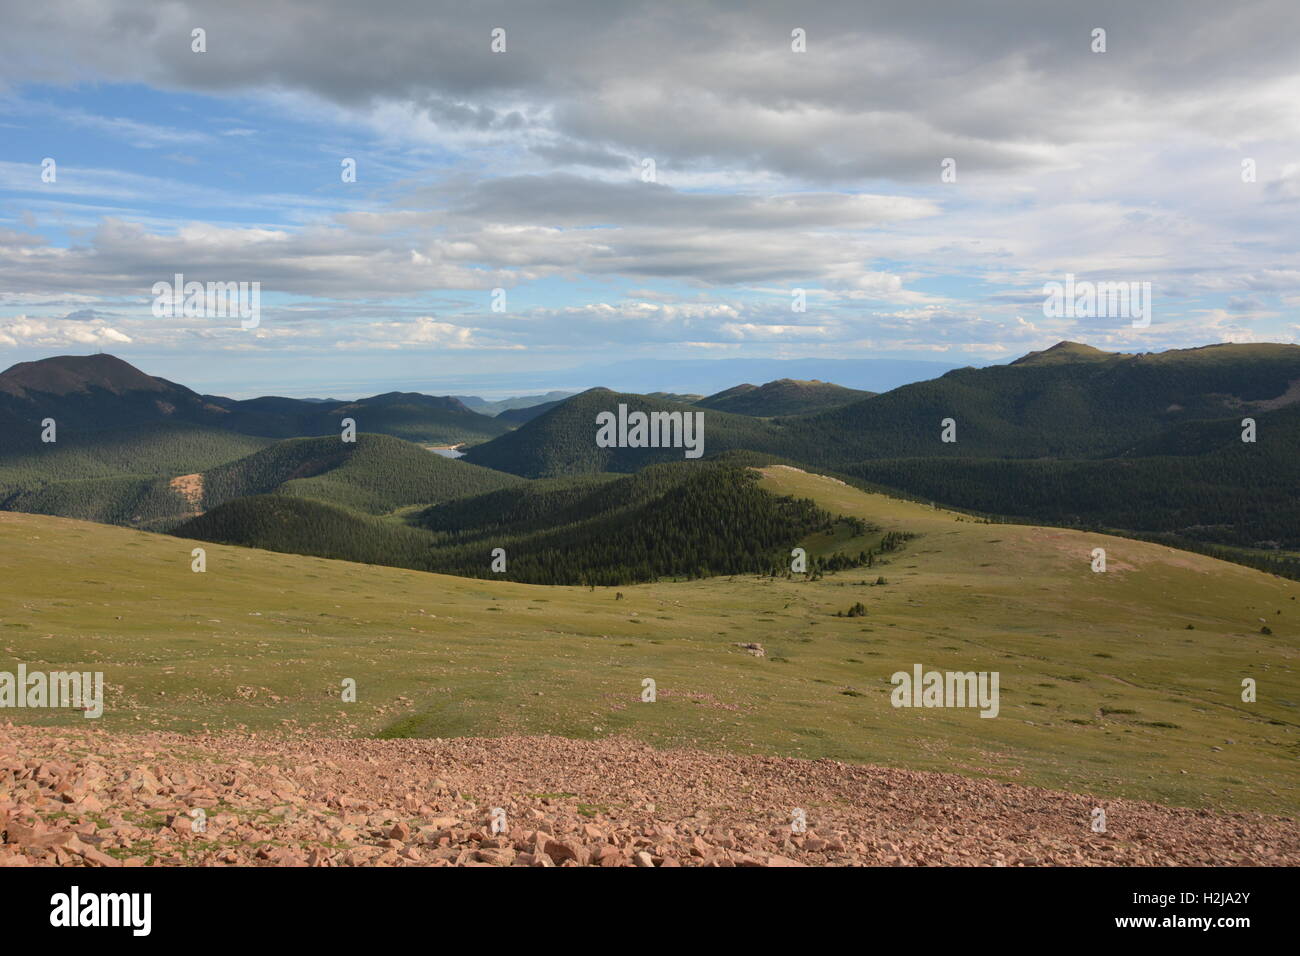 View of Rocky Mountains from Pikes Peak Cog Railway train in Colorado. Stock Photo